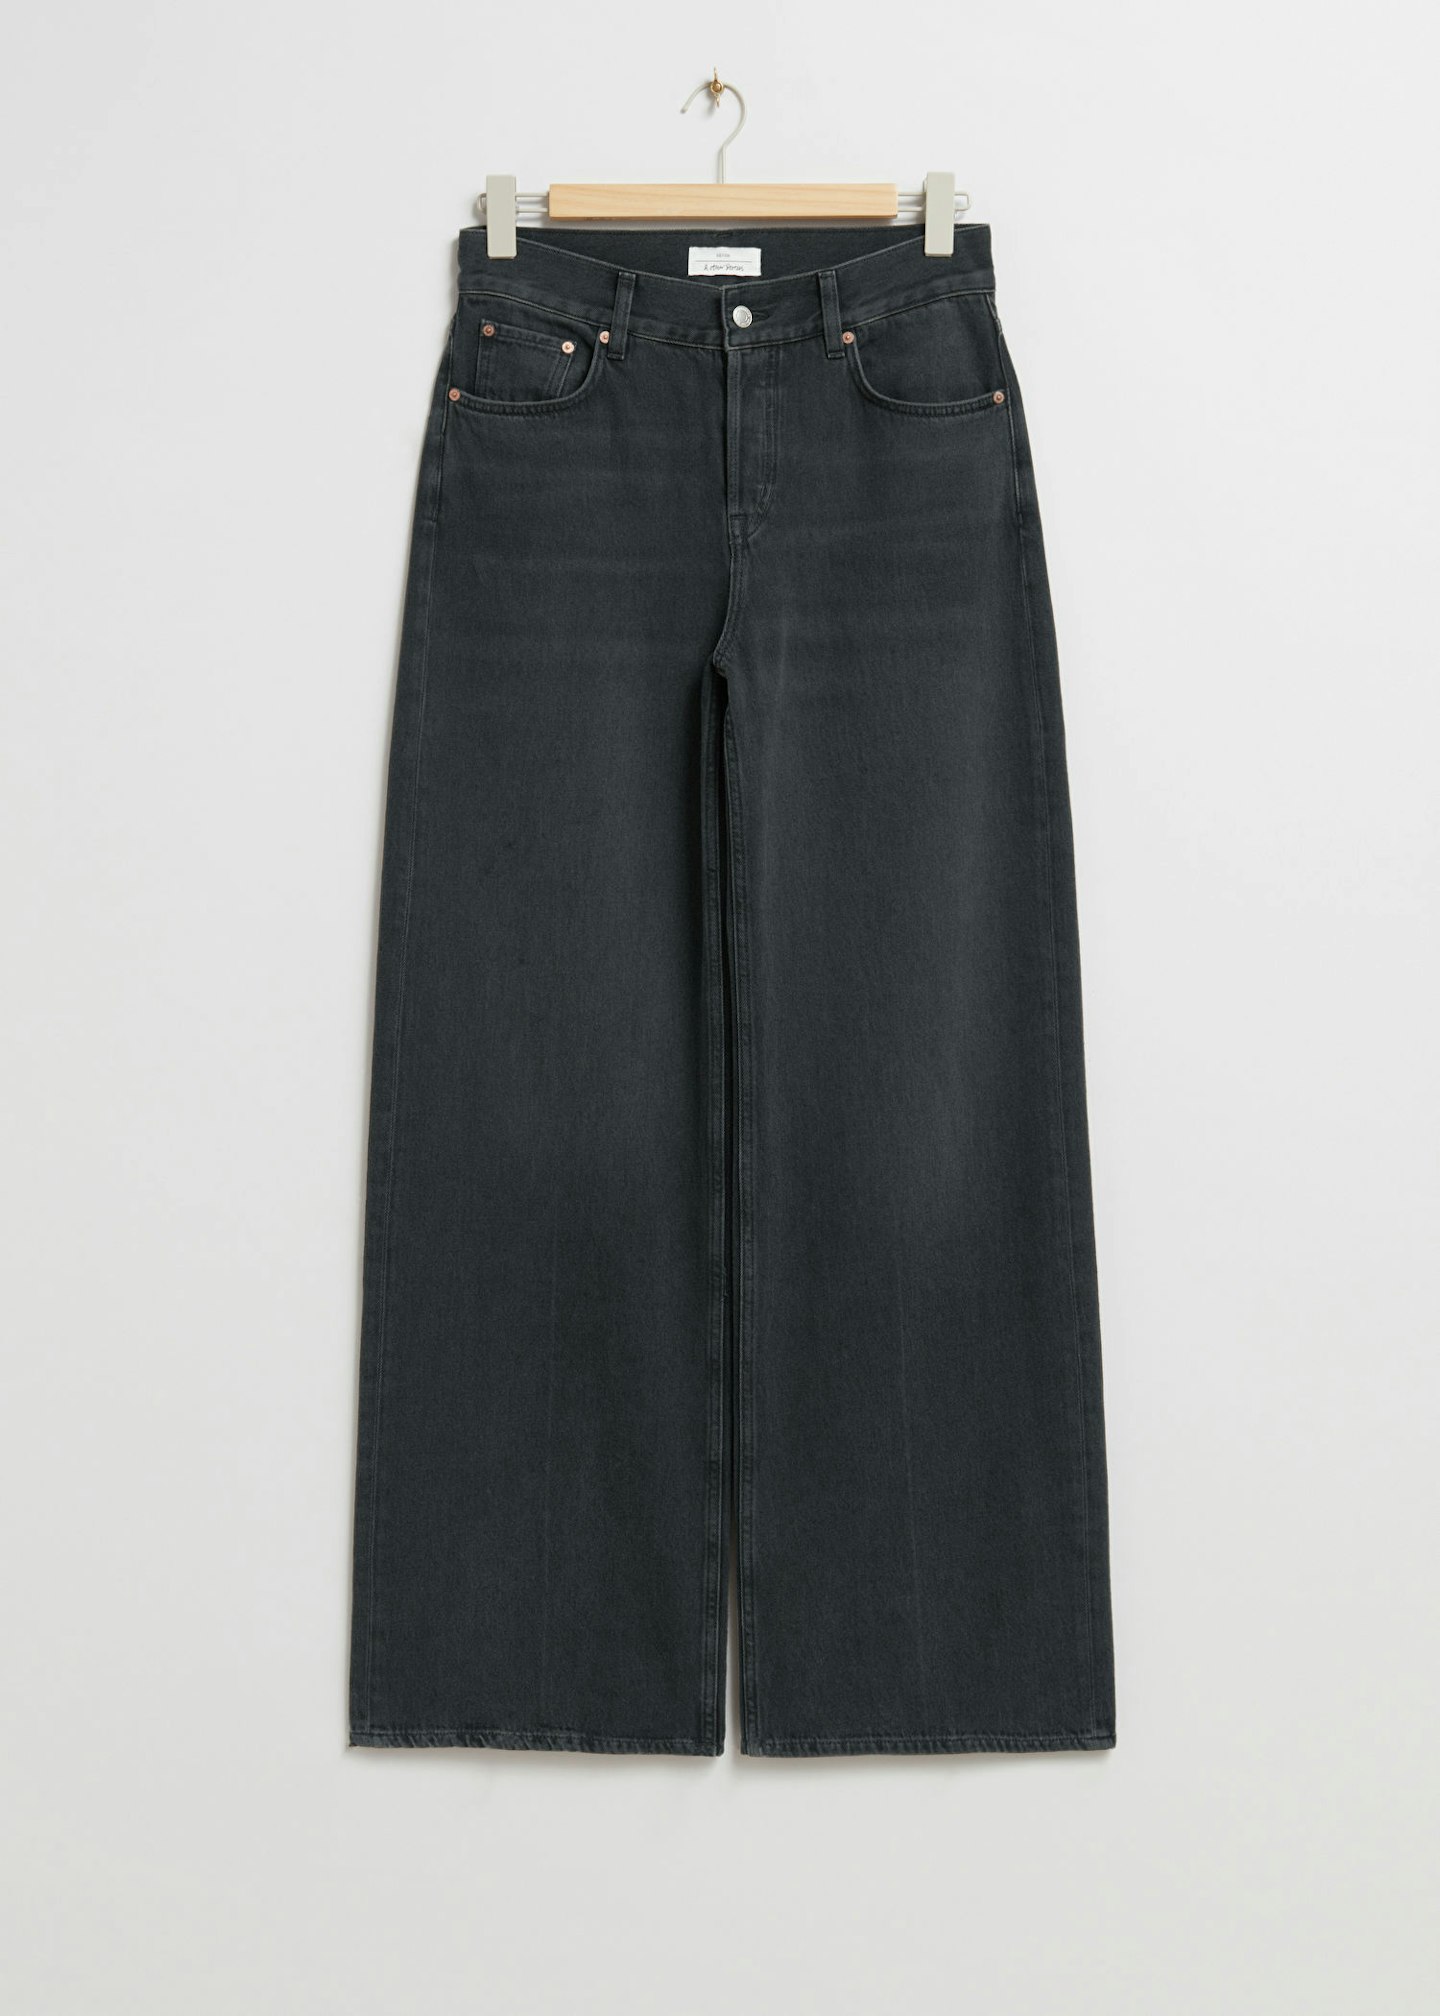 & Other Stories, Wide Leg Jeans 